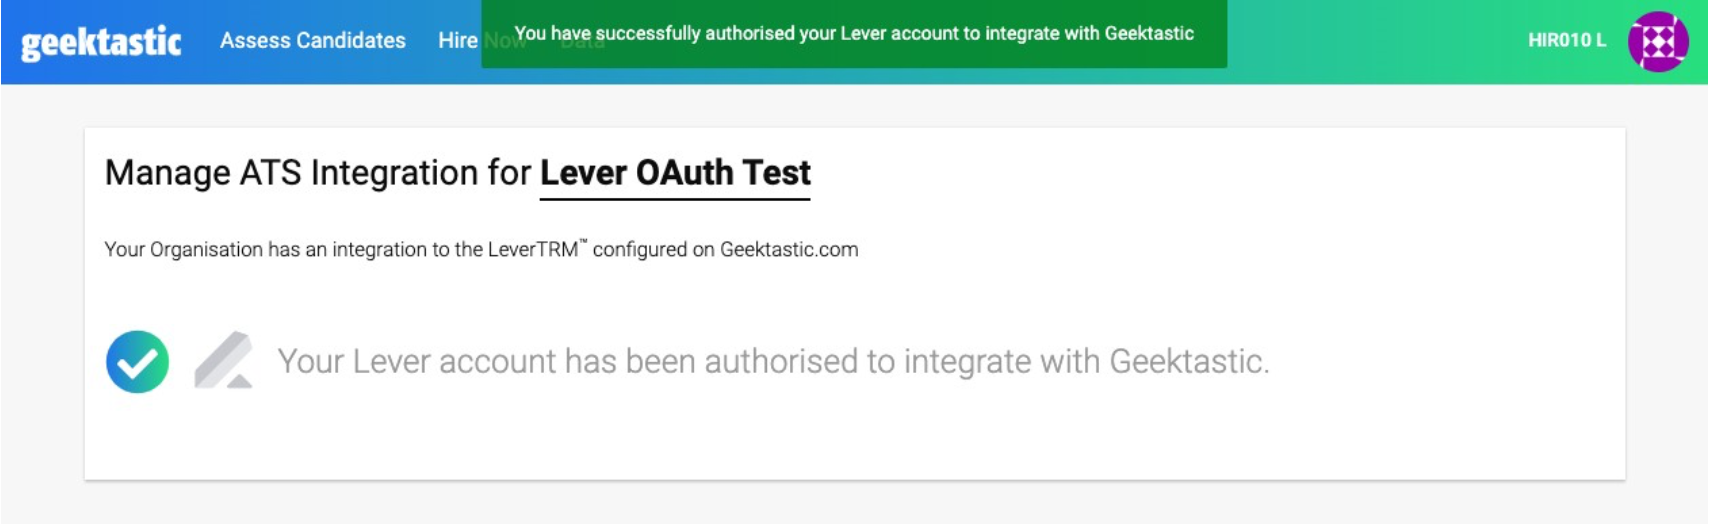 Geektastic platform showing Manage integration page with successful integration message.